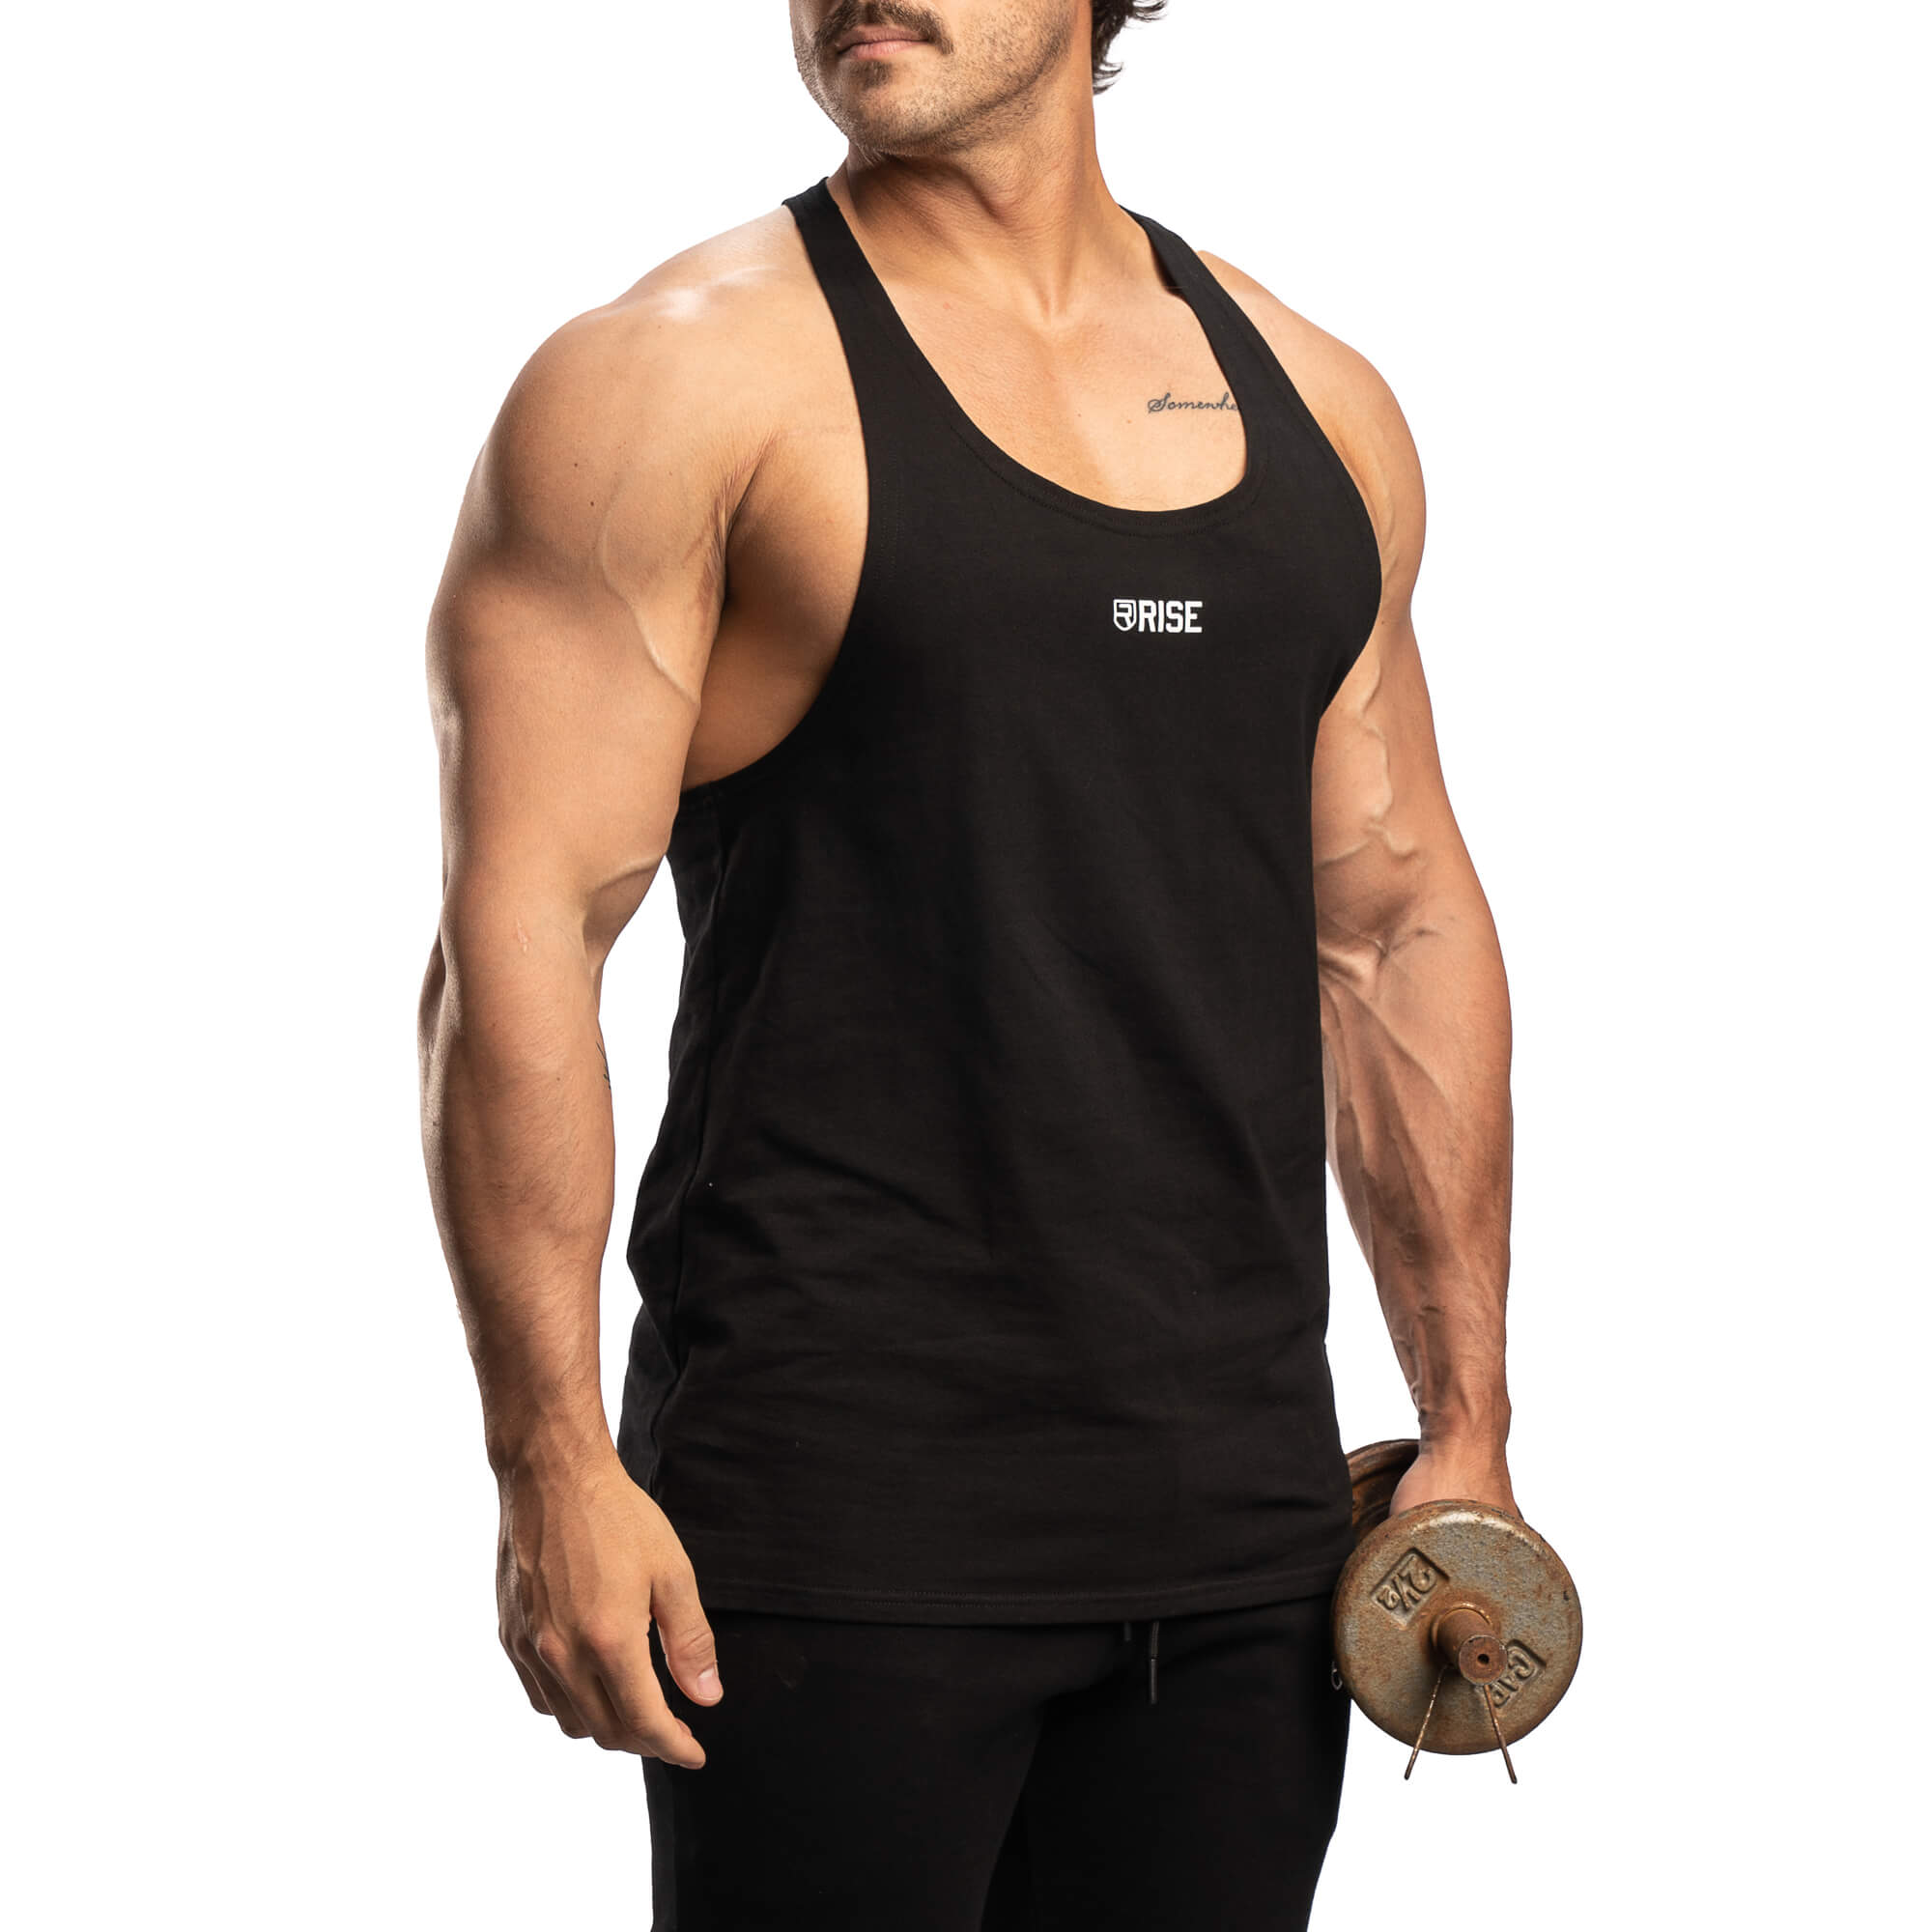 All Products, Men's Gym Clothes